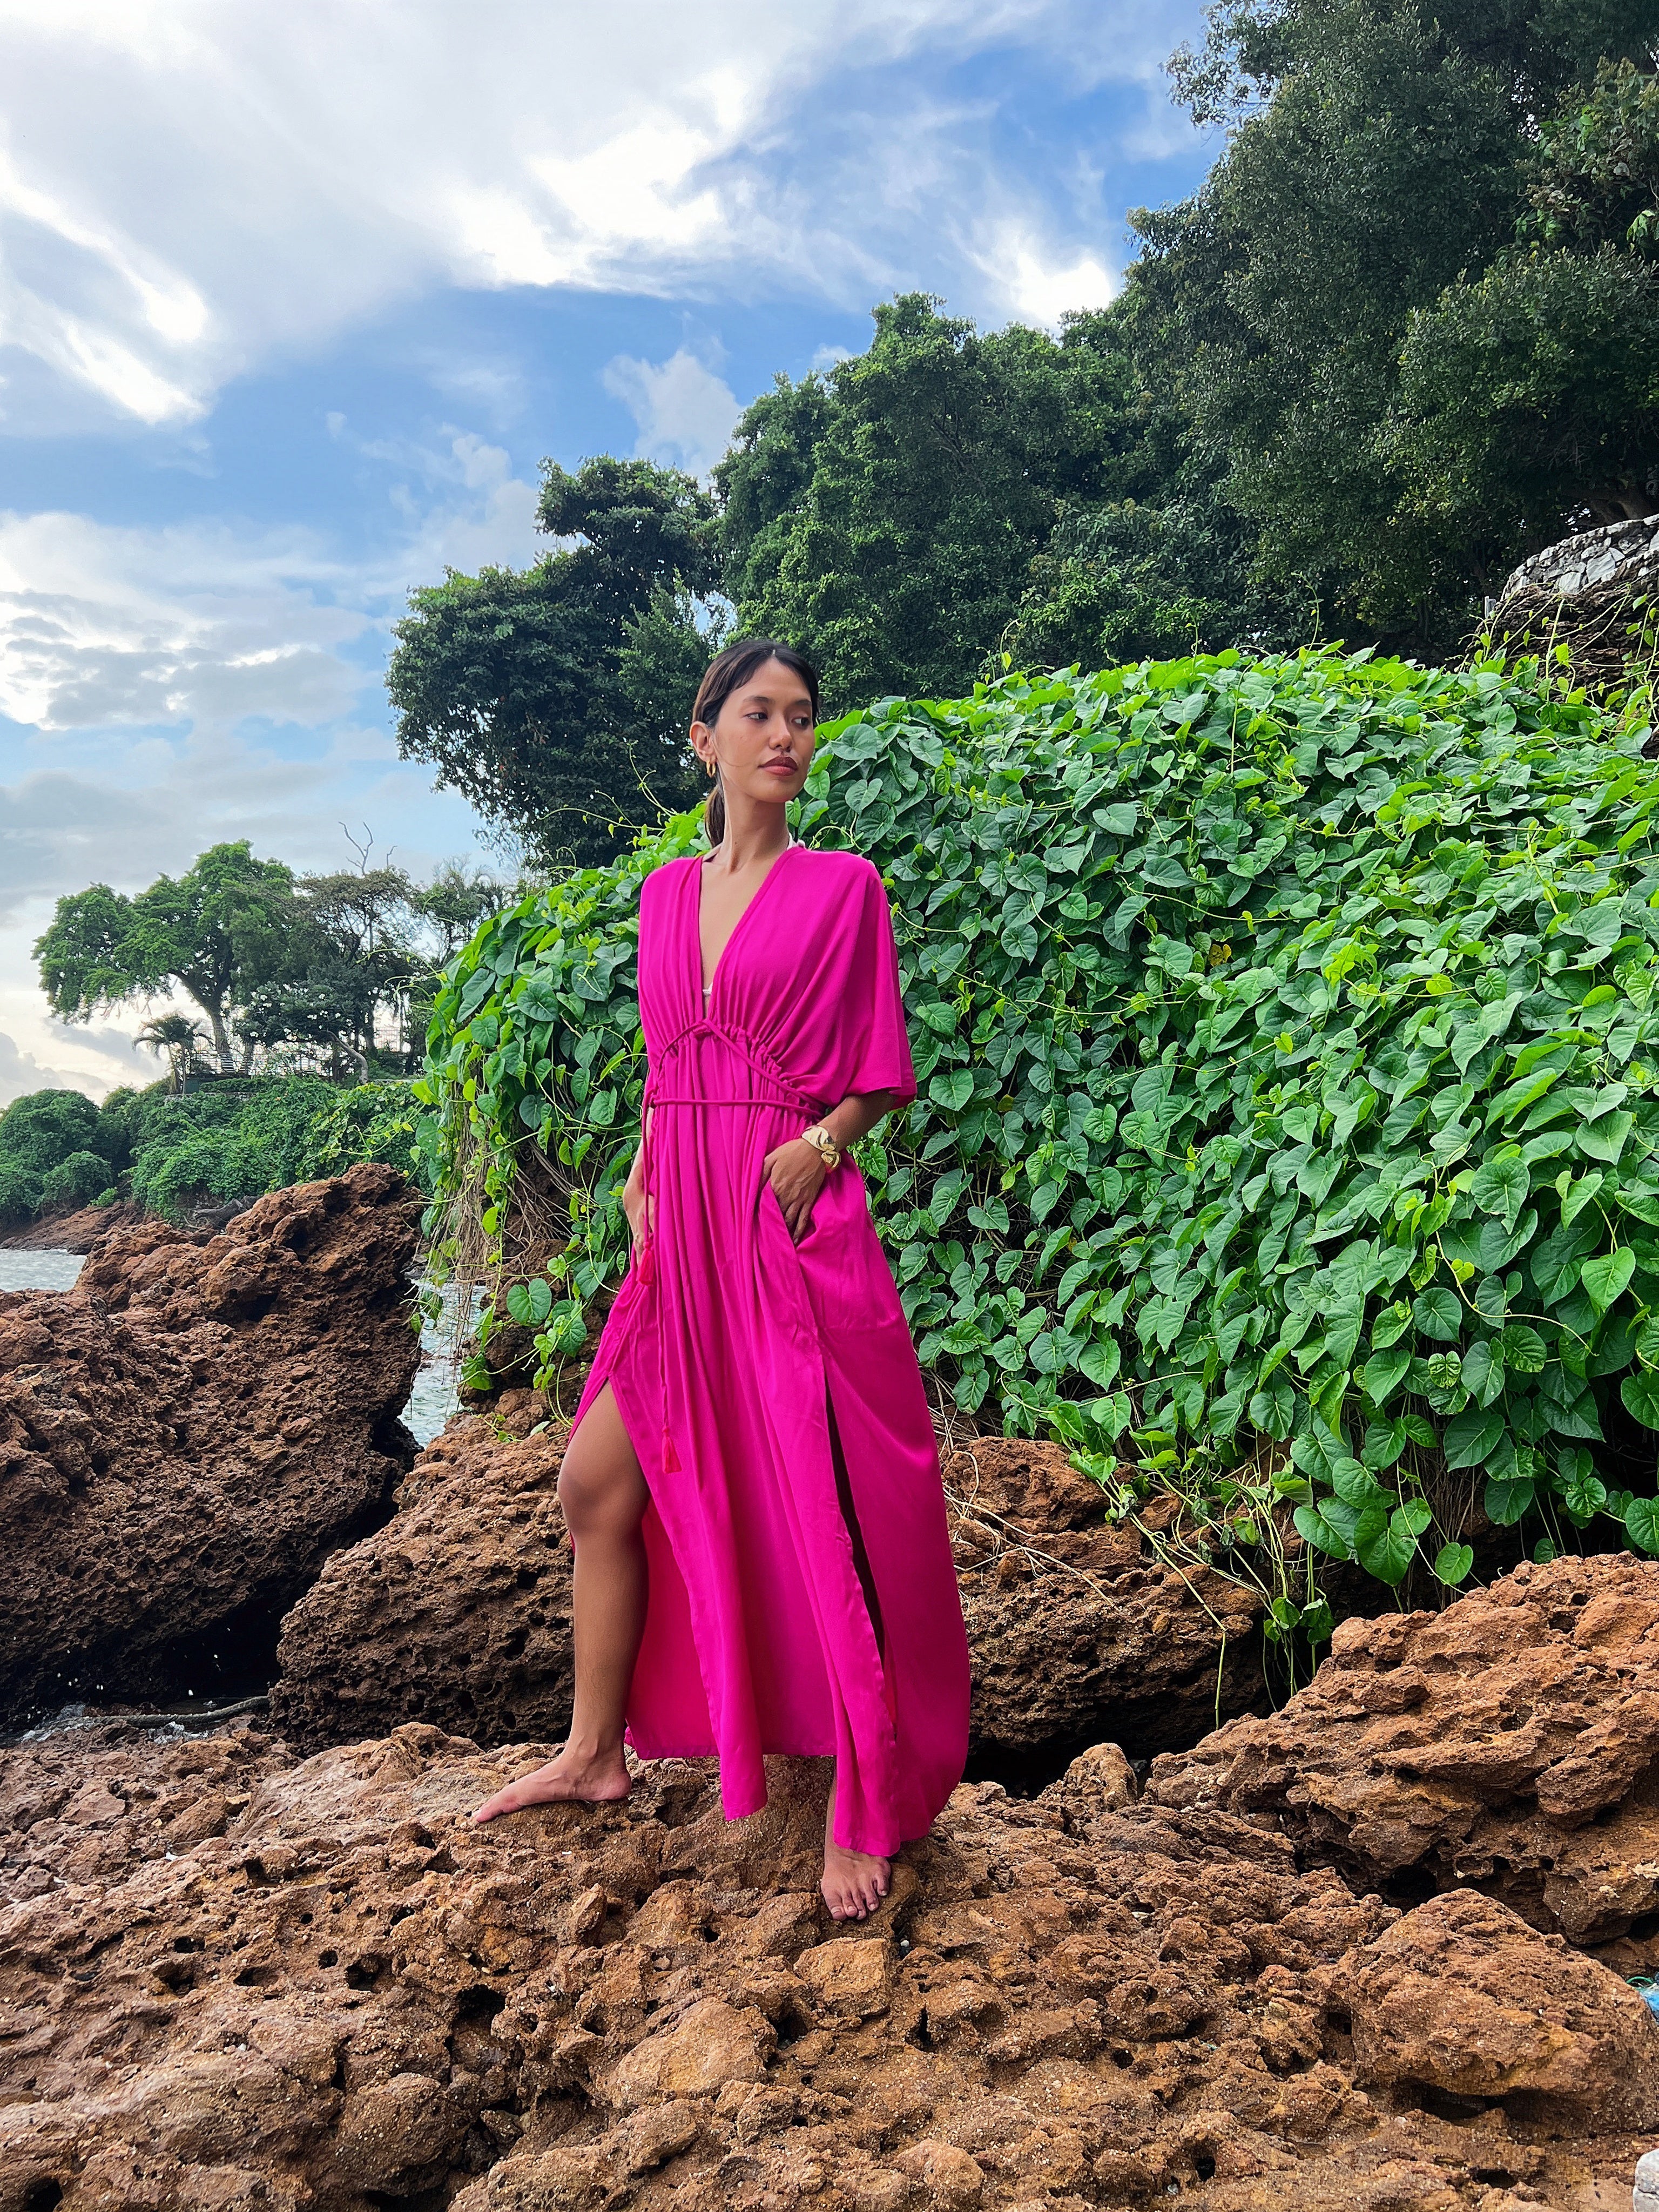 Shop Pink Kaftan Dress in limitless comfort and elegance with our Goddess Kaftan Maxi Dress Dyed fuchsia kaftan maxi dress. This fuchsia maxi dress is the perfect vacation wear with Coco de Chom?